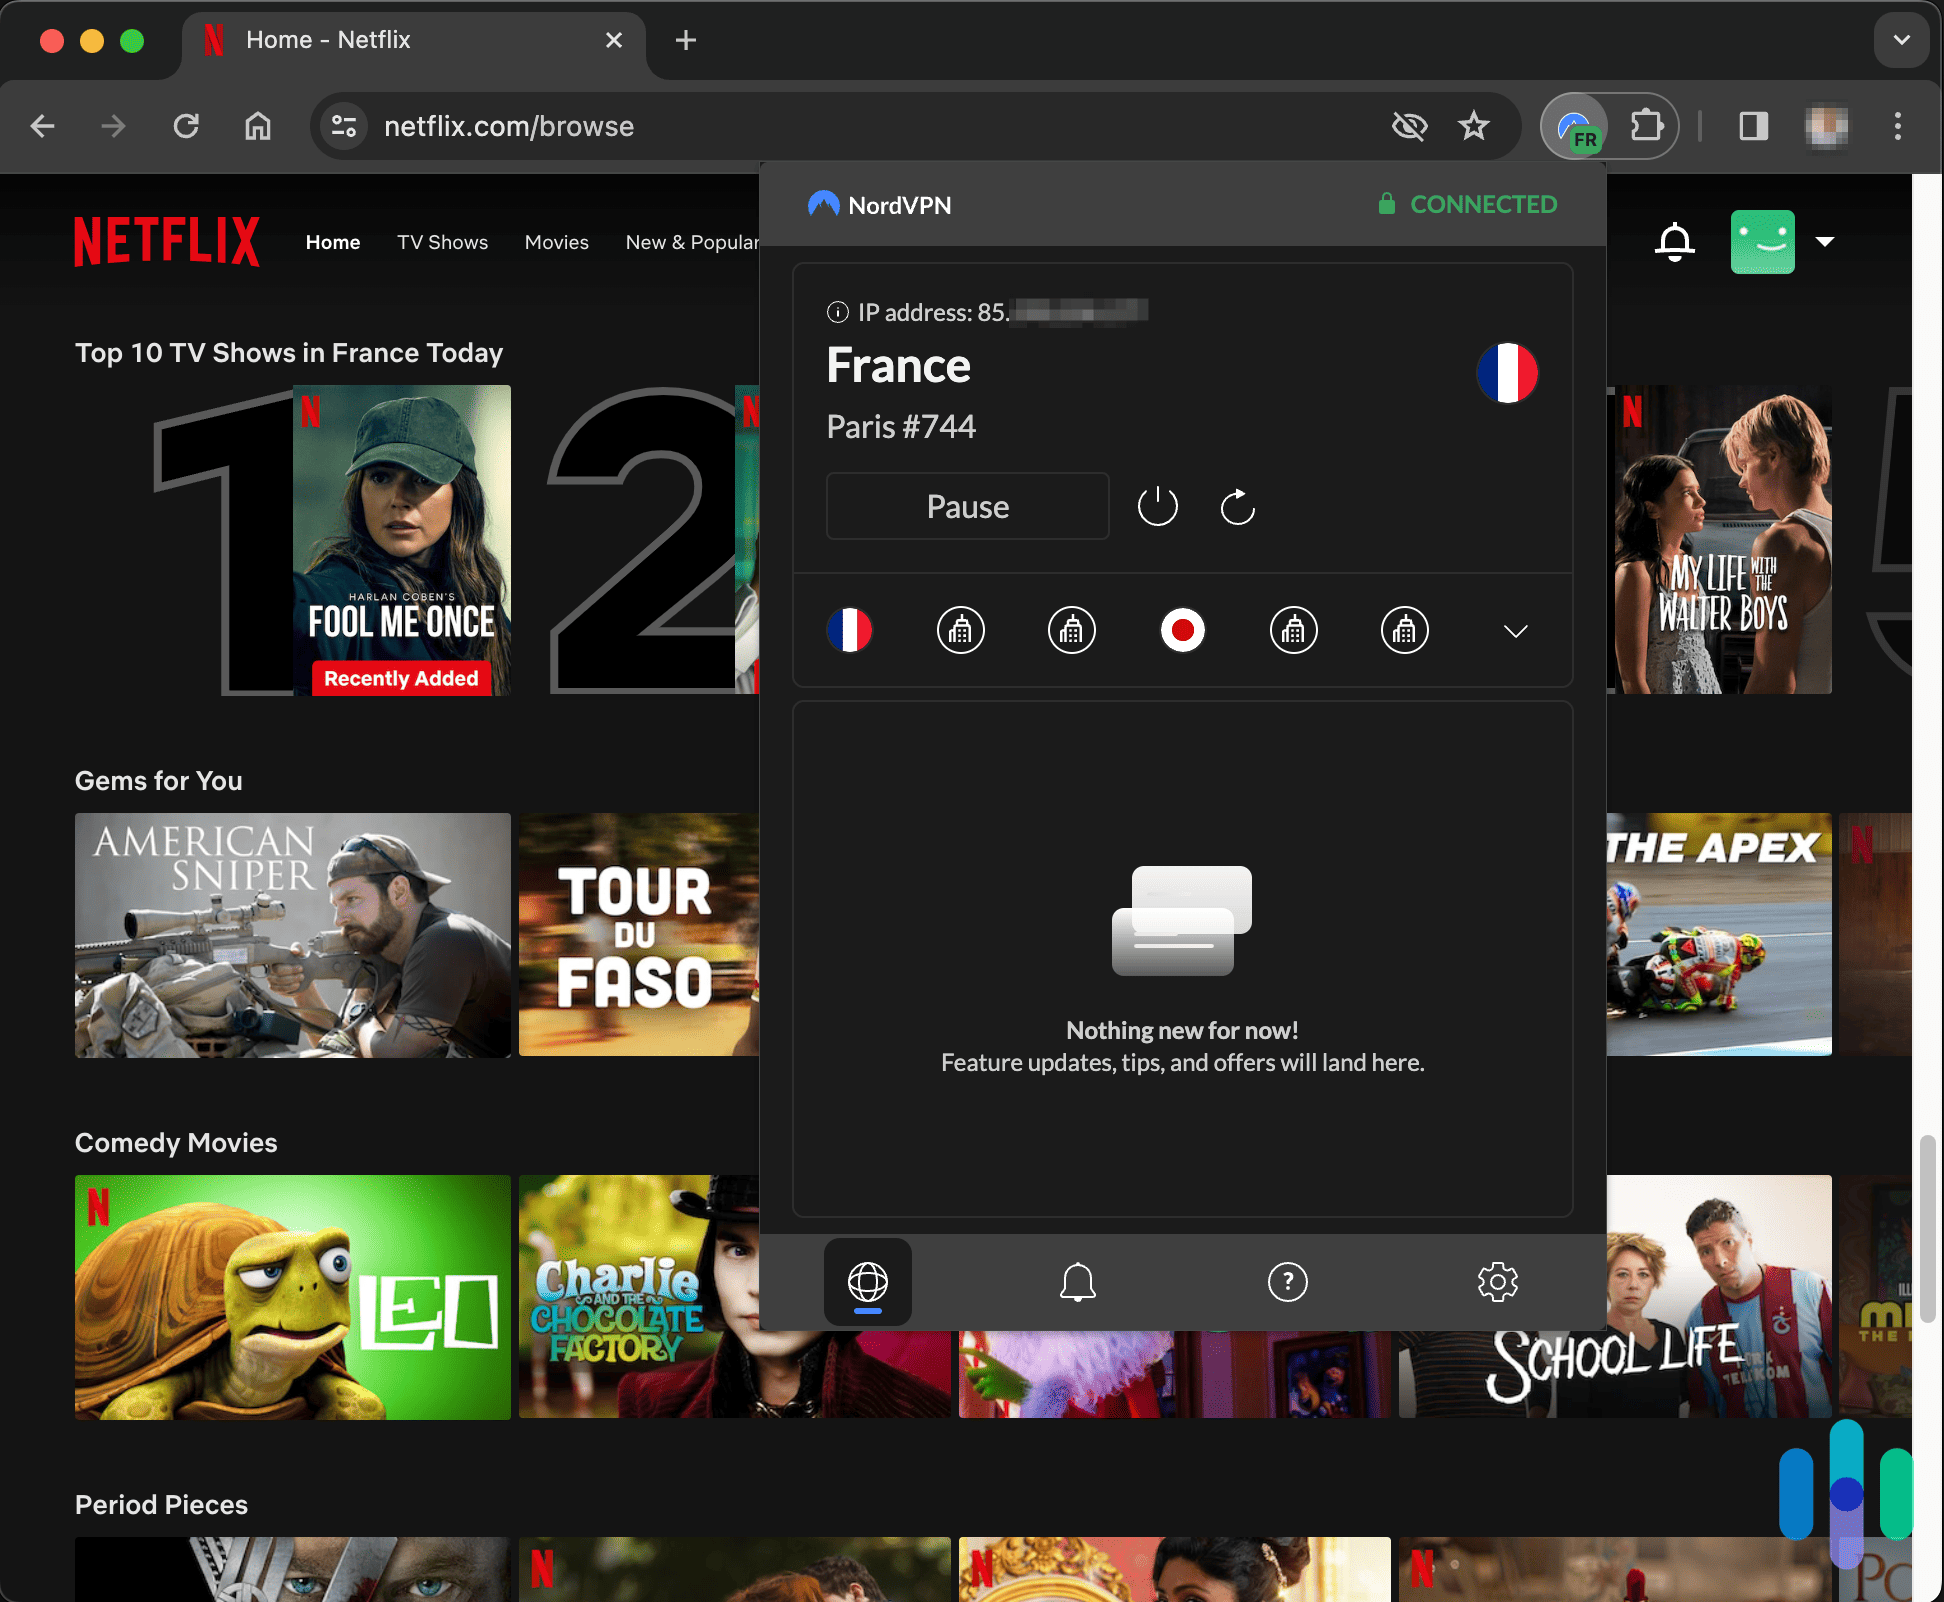 NordVPN Chrome extension connected to France and viewing Netflix